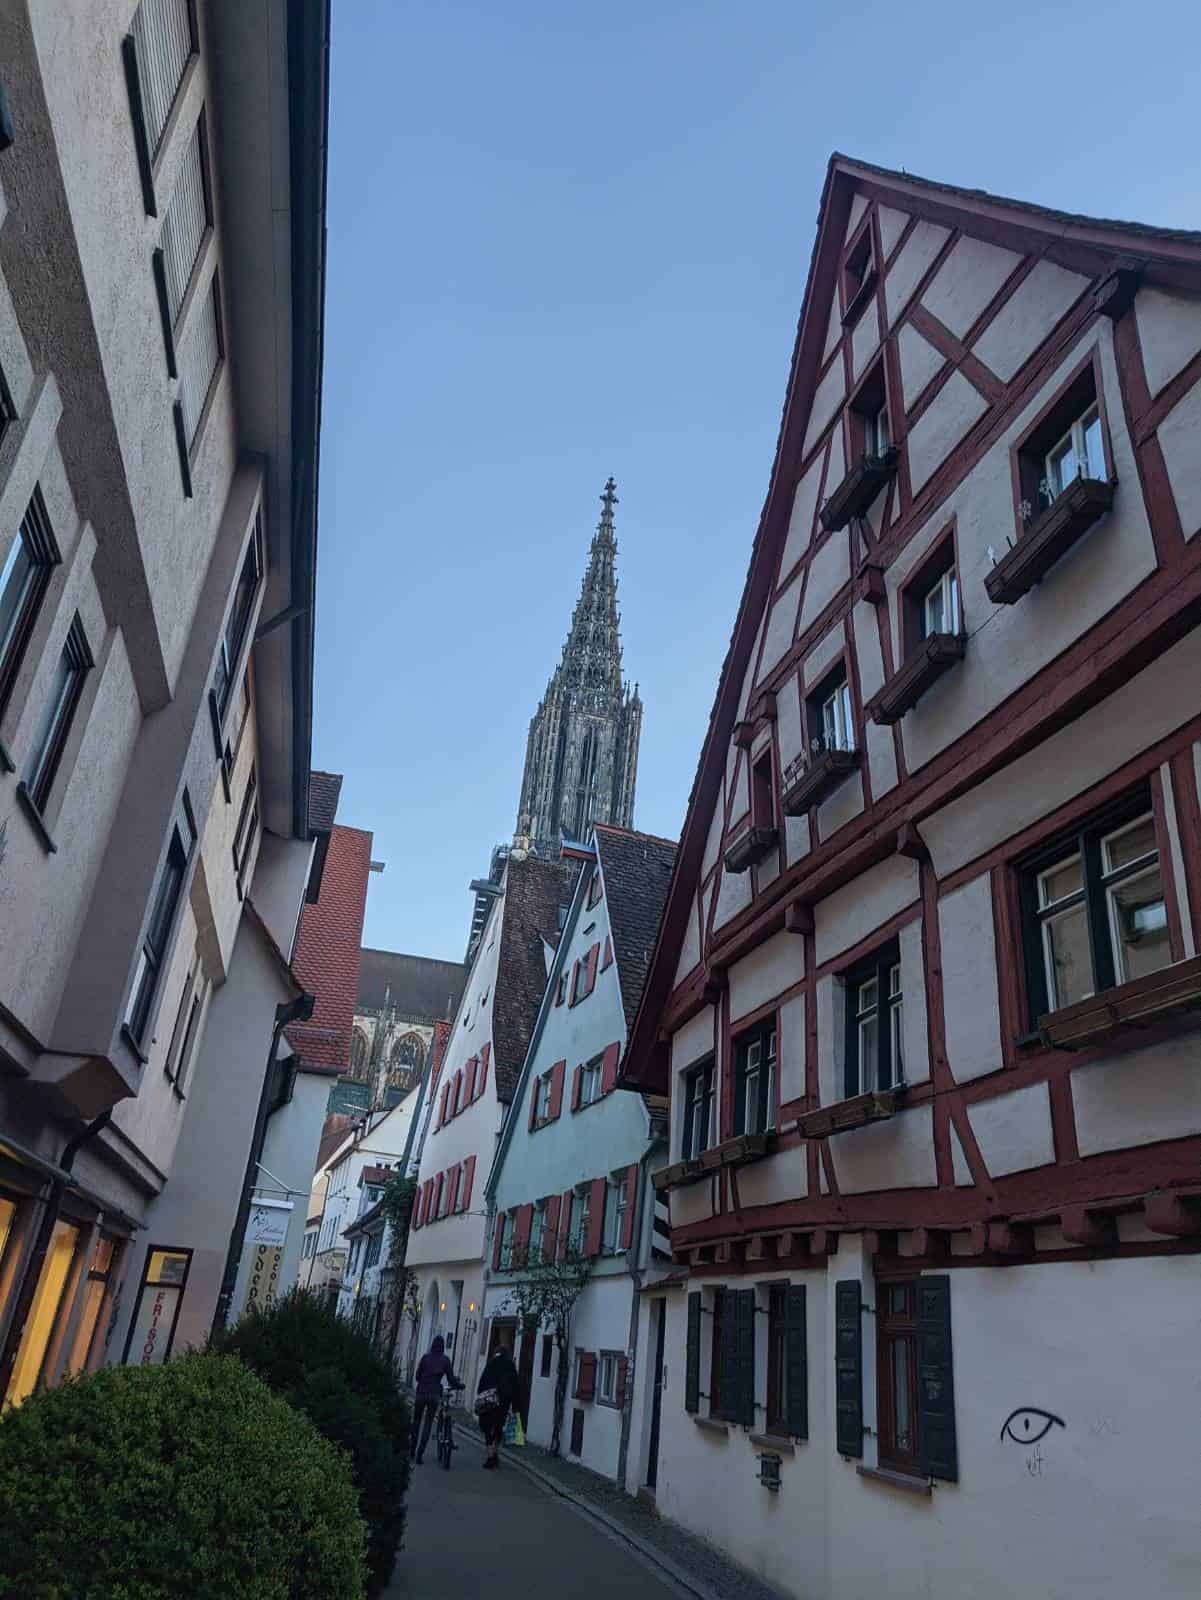 The spire of Ulm’s minster peaking out above the old town